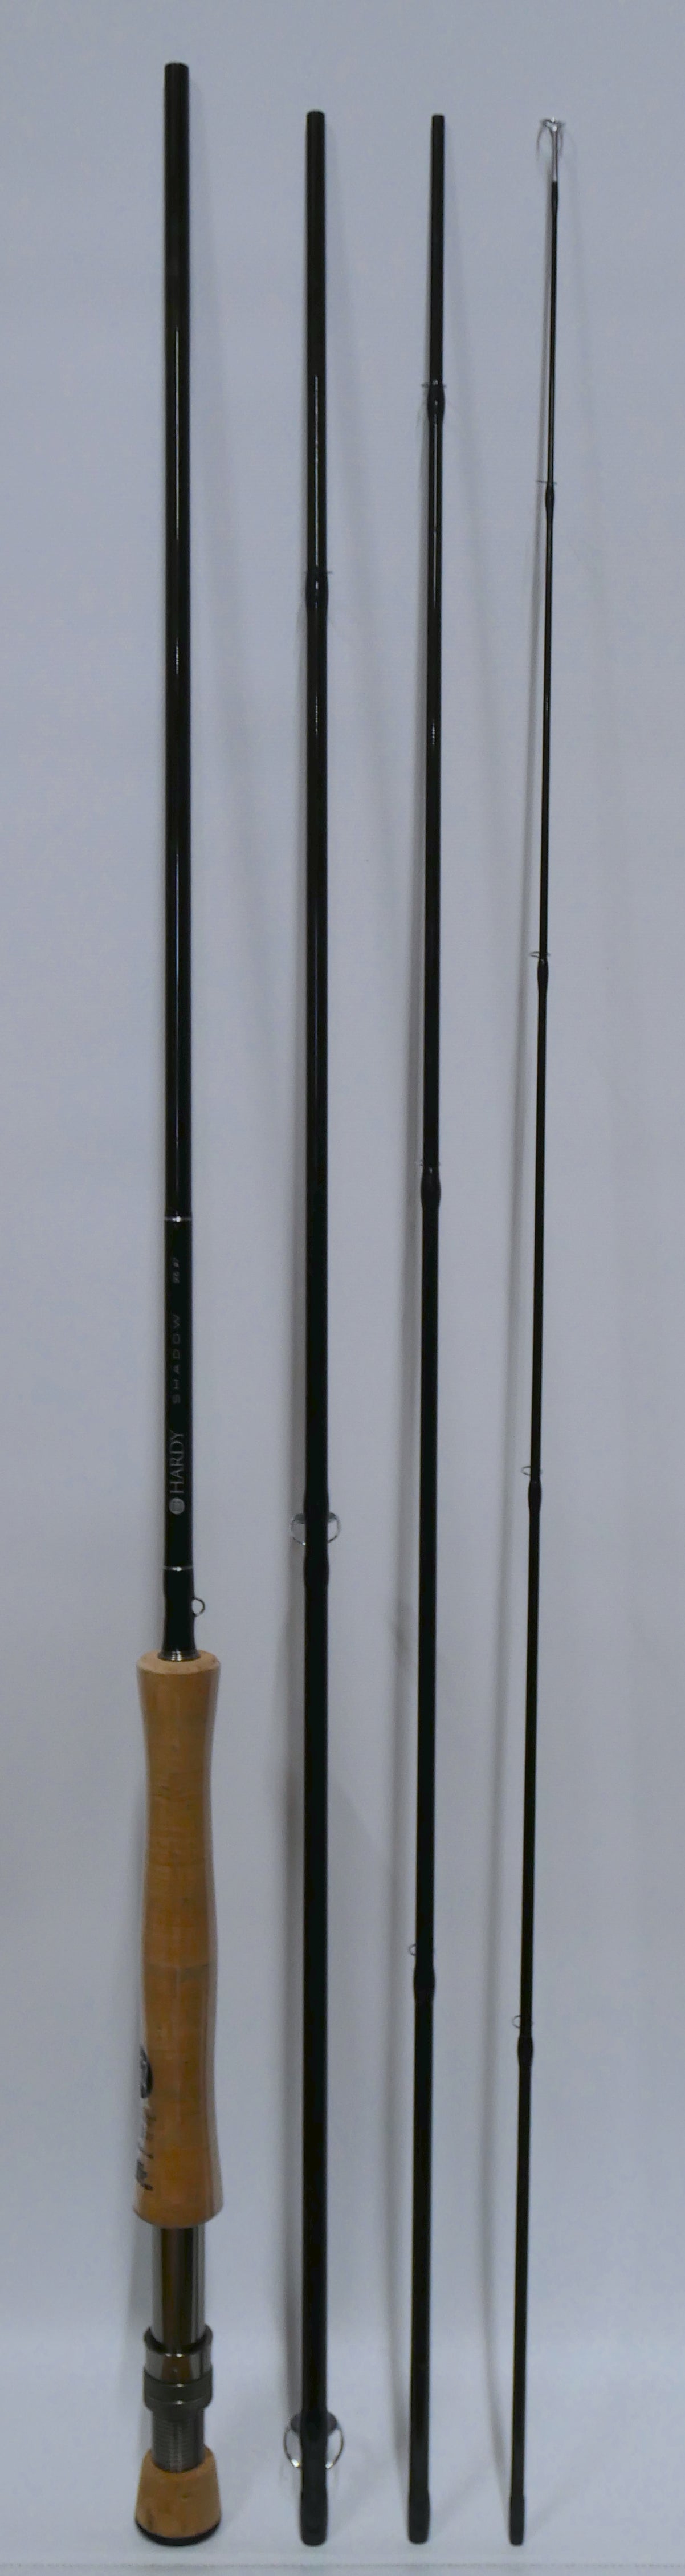 Hardy Shadow 9.6ft #7 Fly Rod – Fish For Tackle